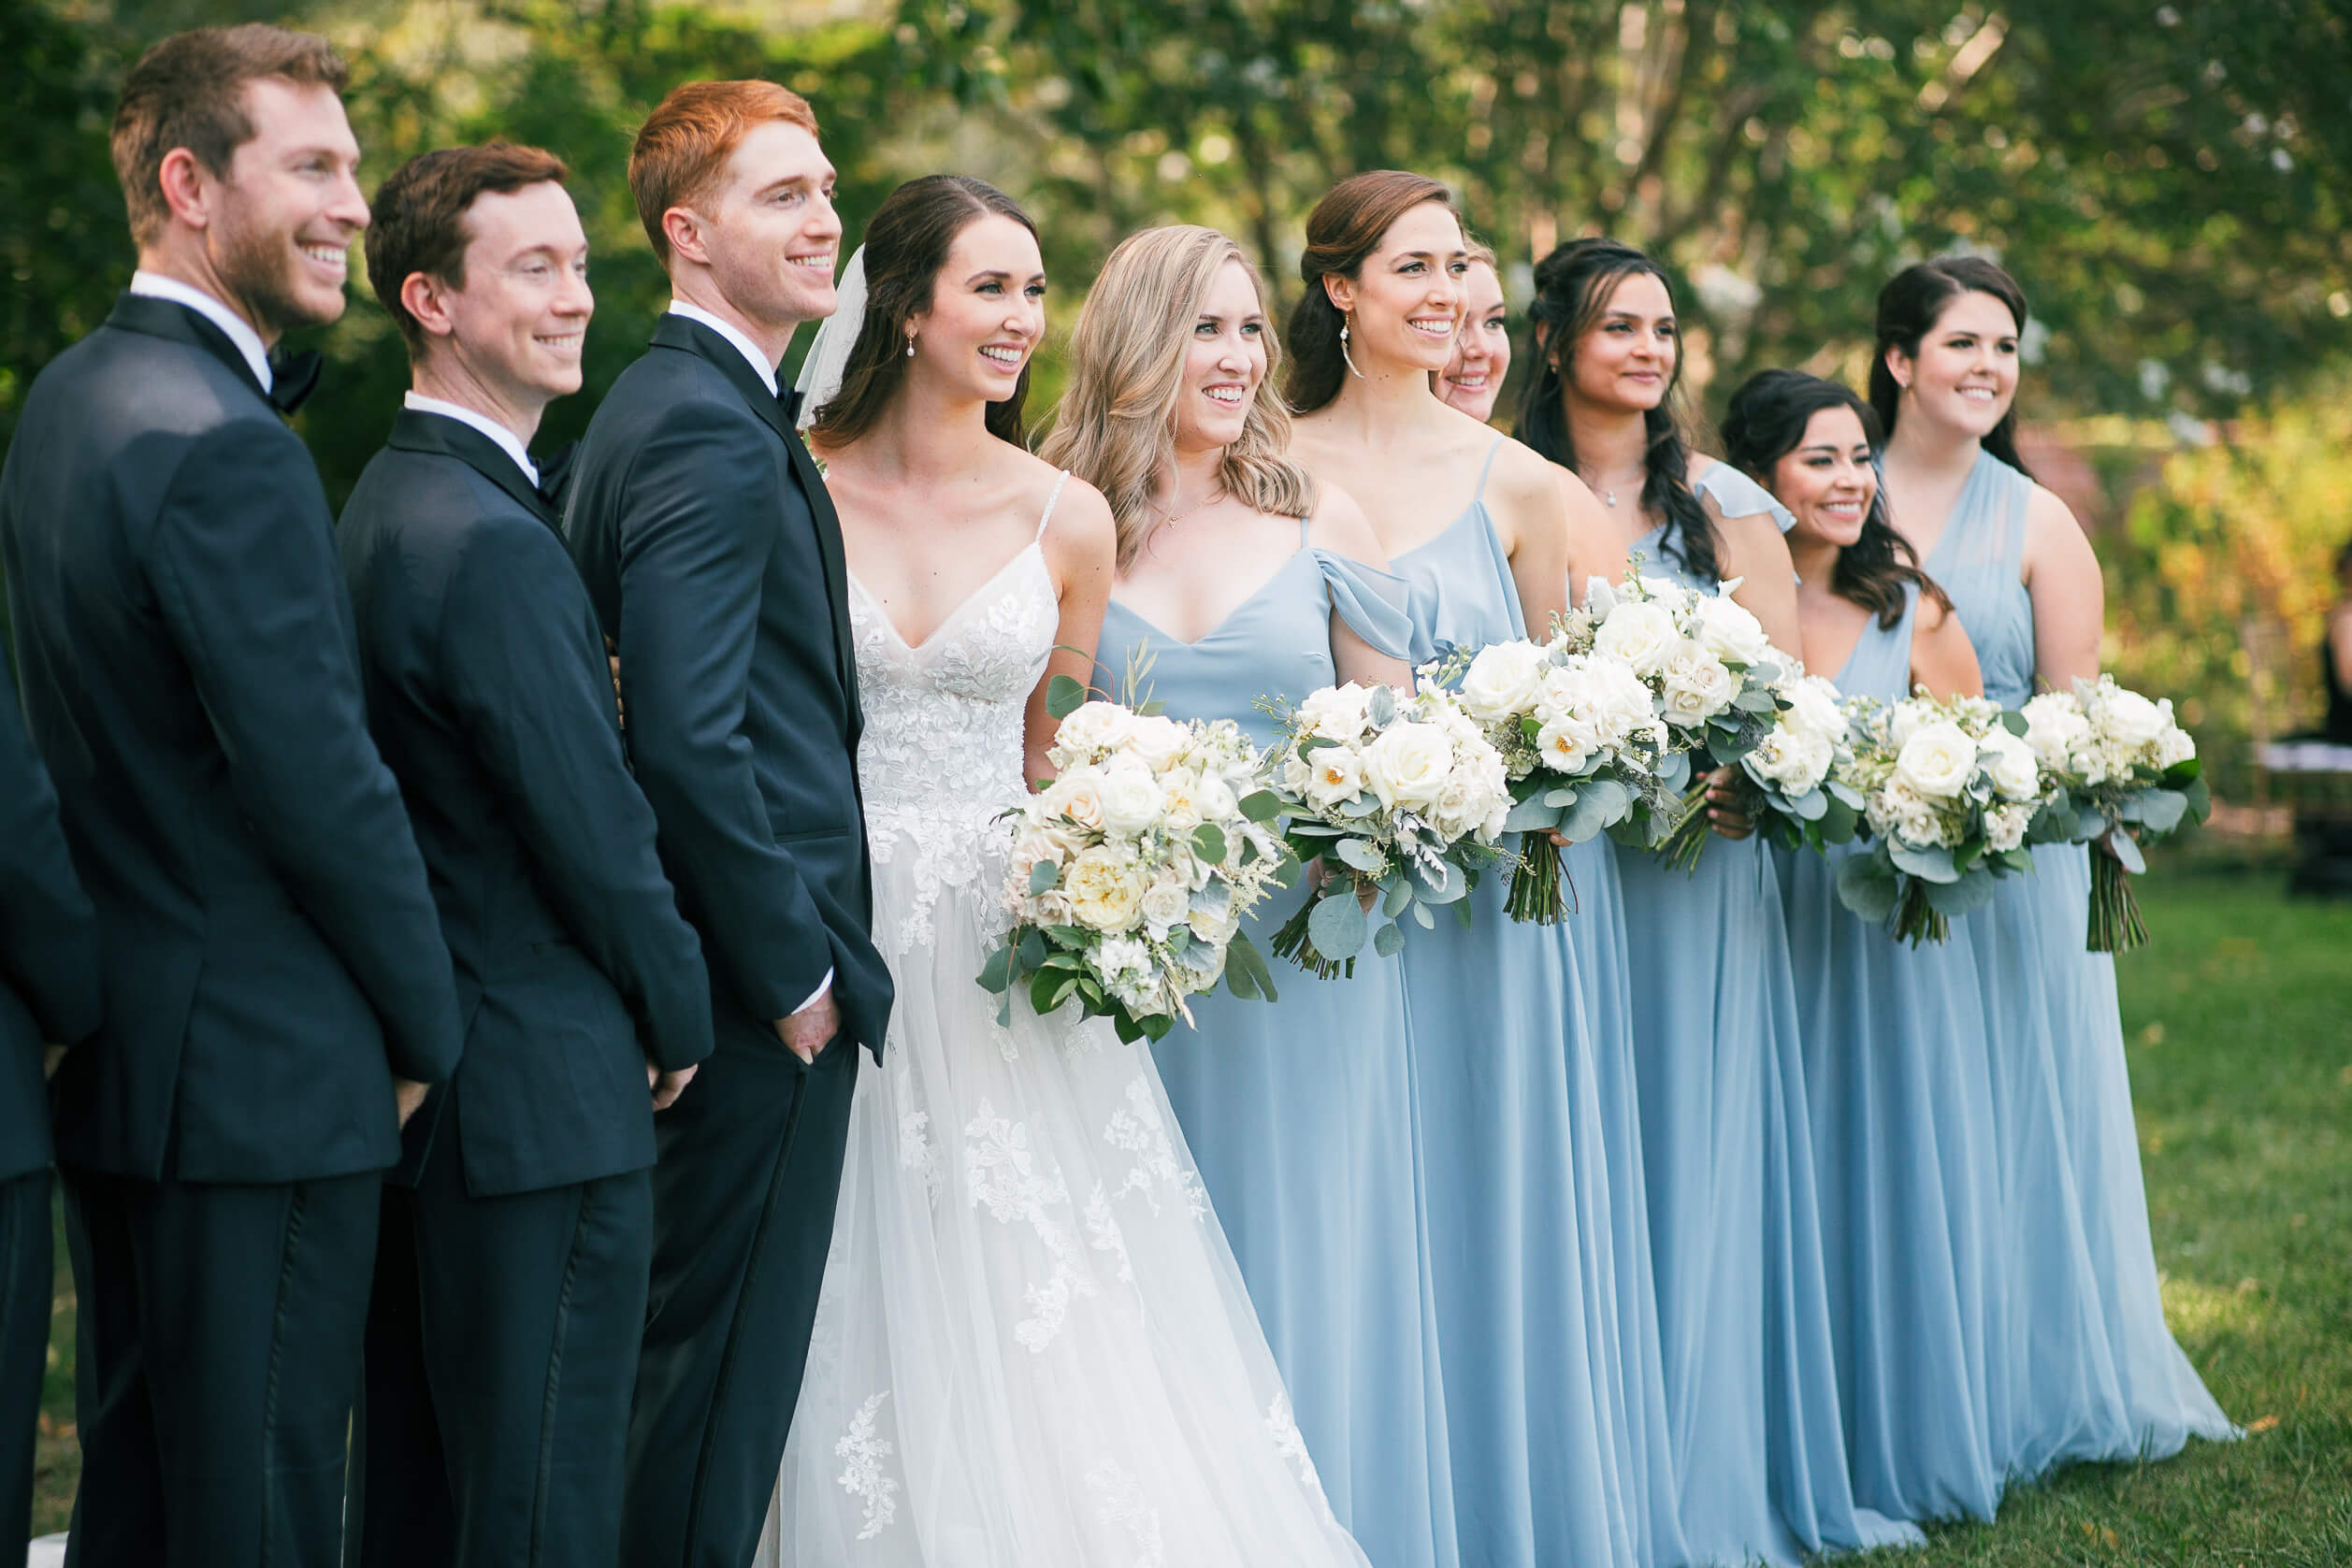 Wedding party in navy and light blue